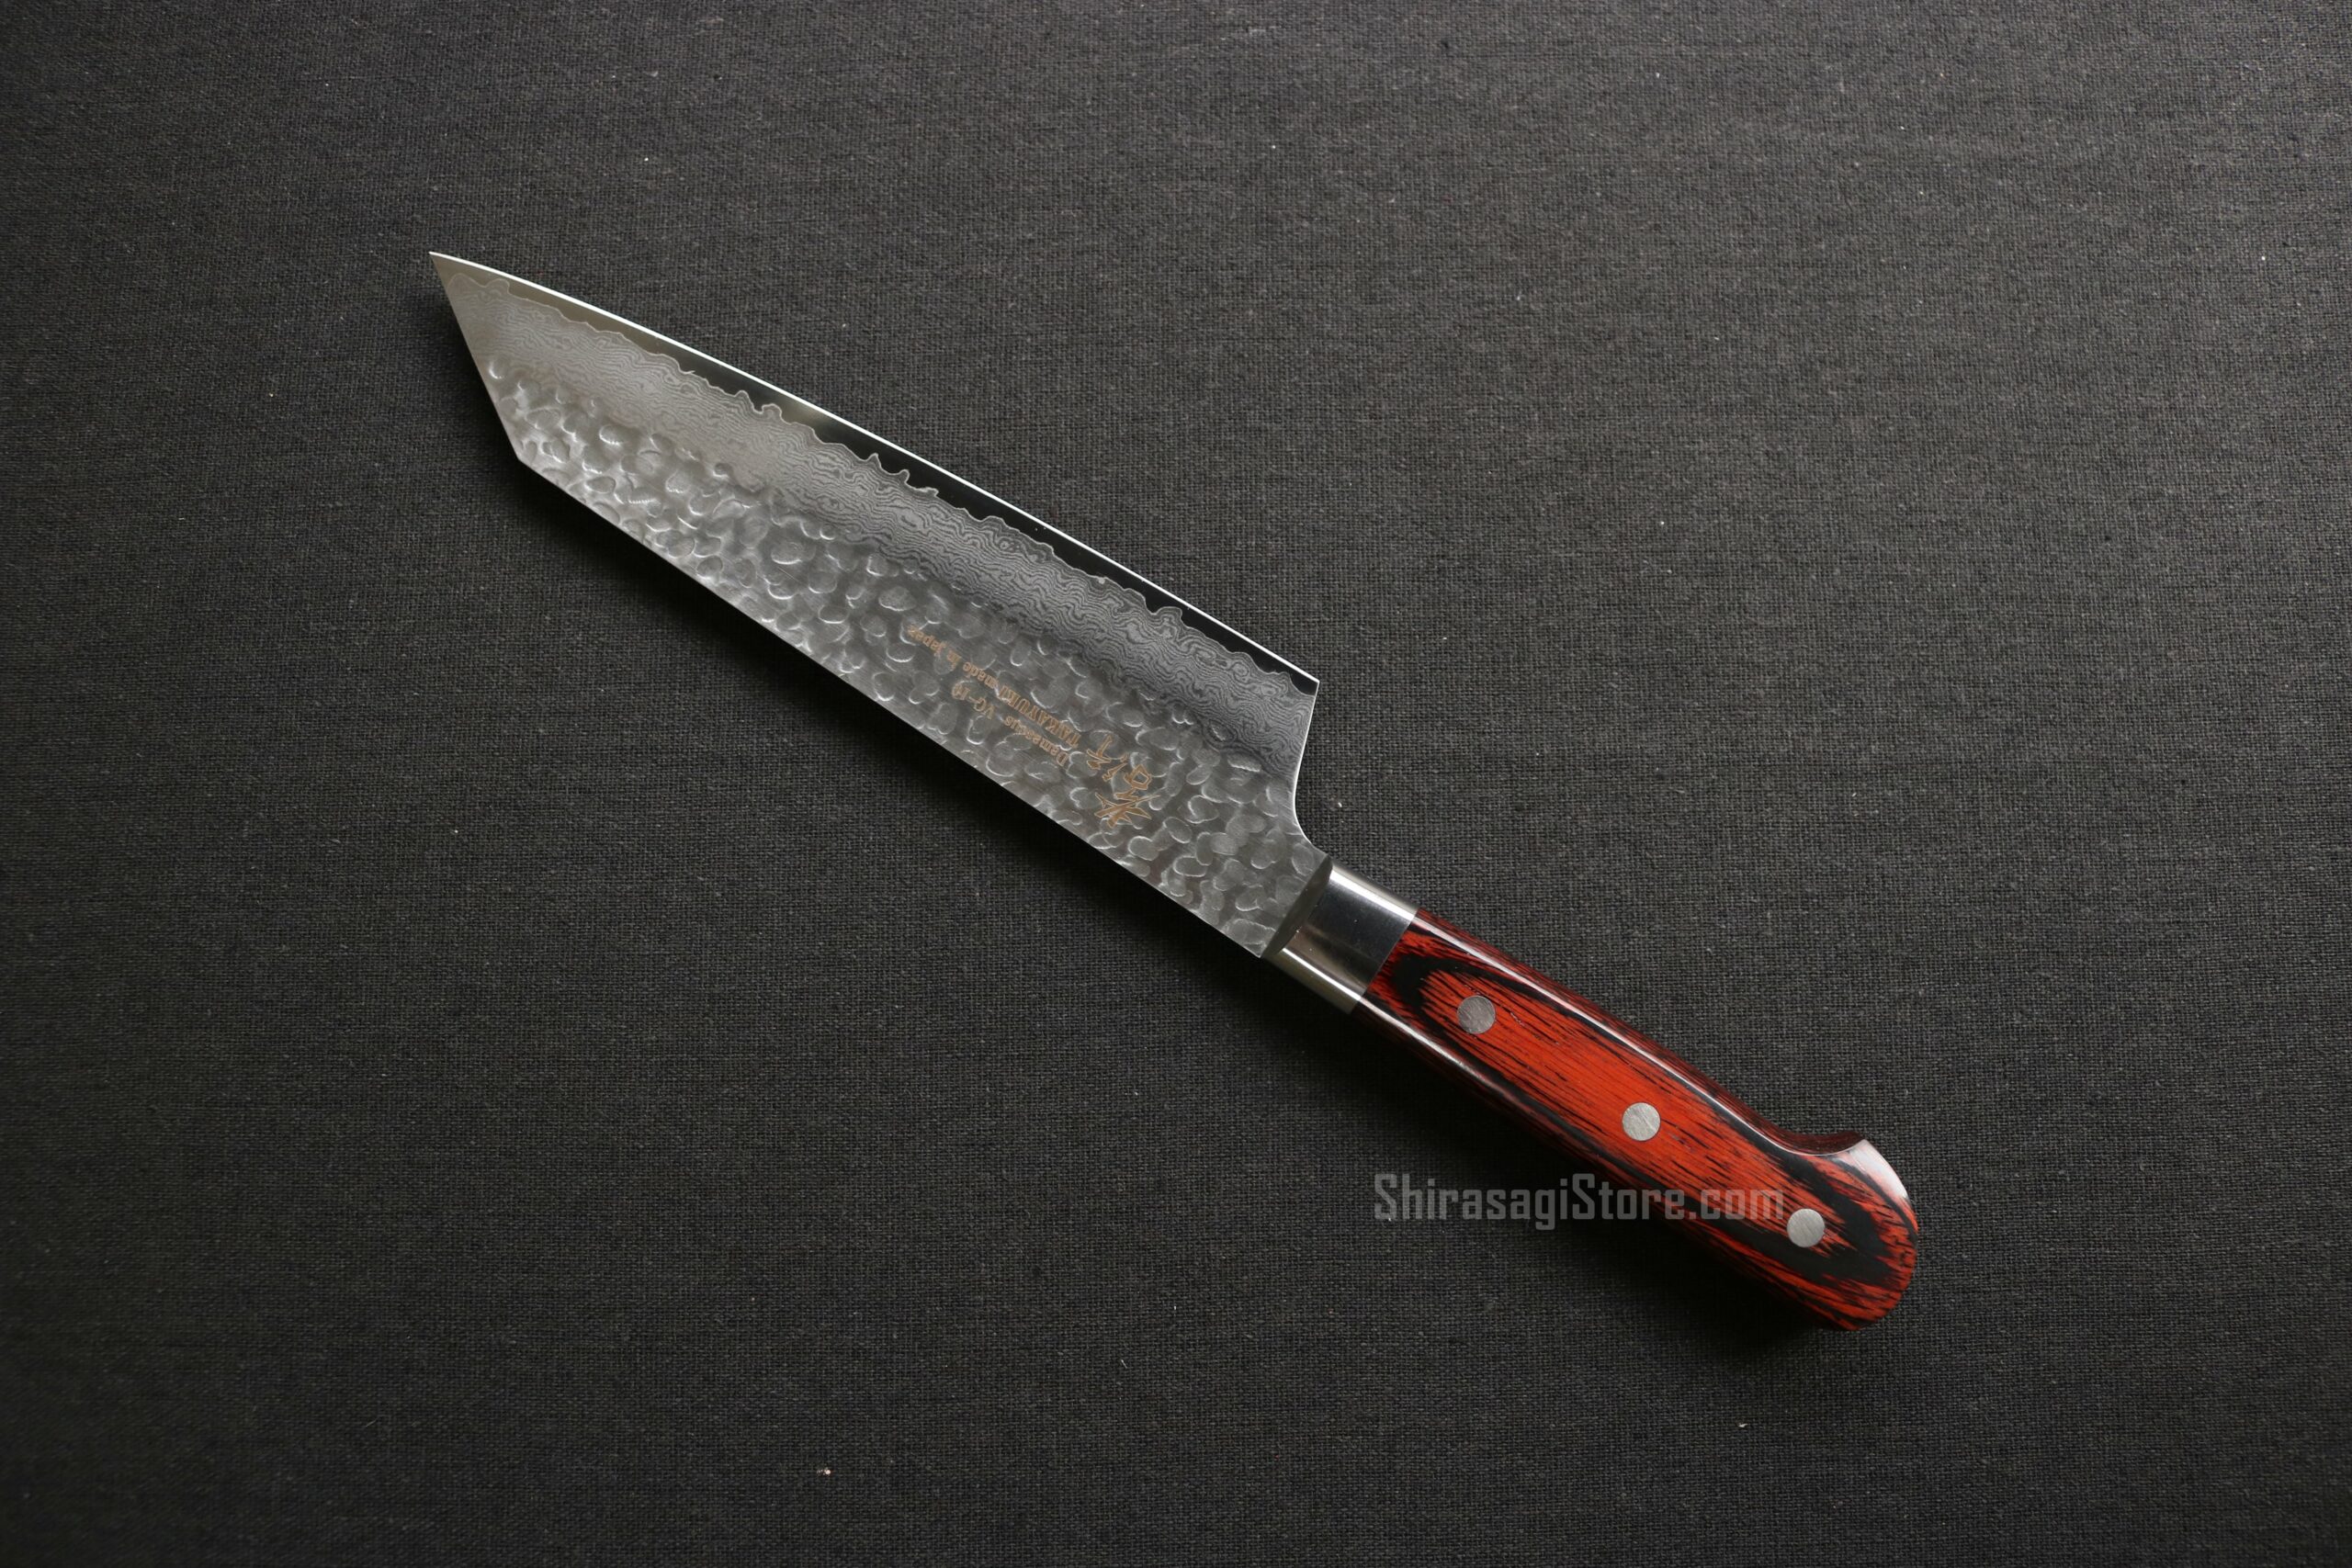 Gyuto (Chef's Knife) Archives - Page 2 of 5 - shirasagistore.com